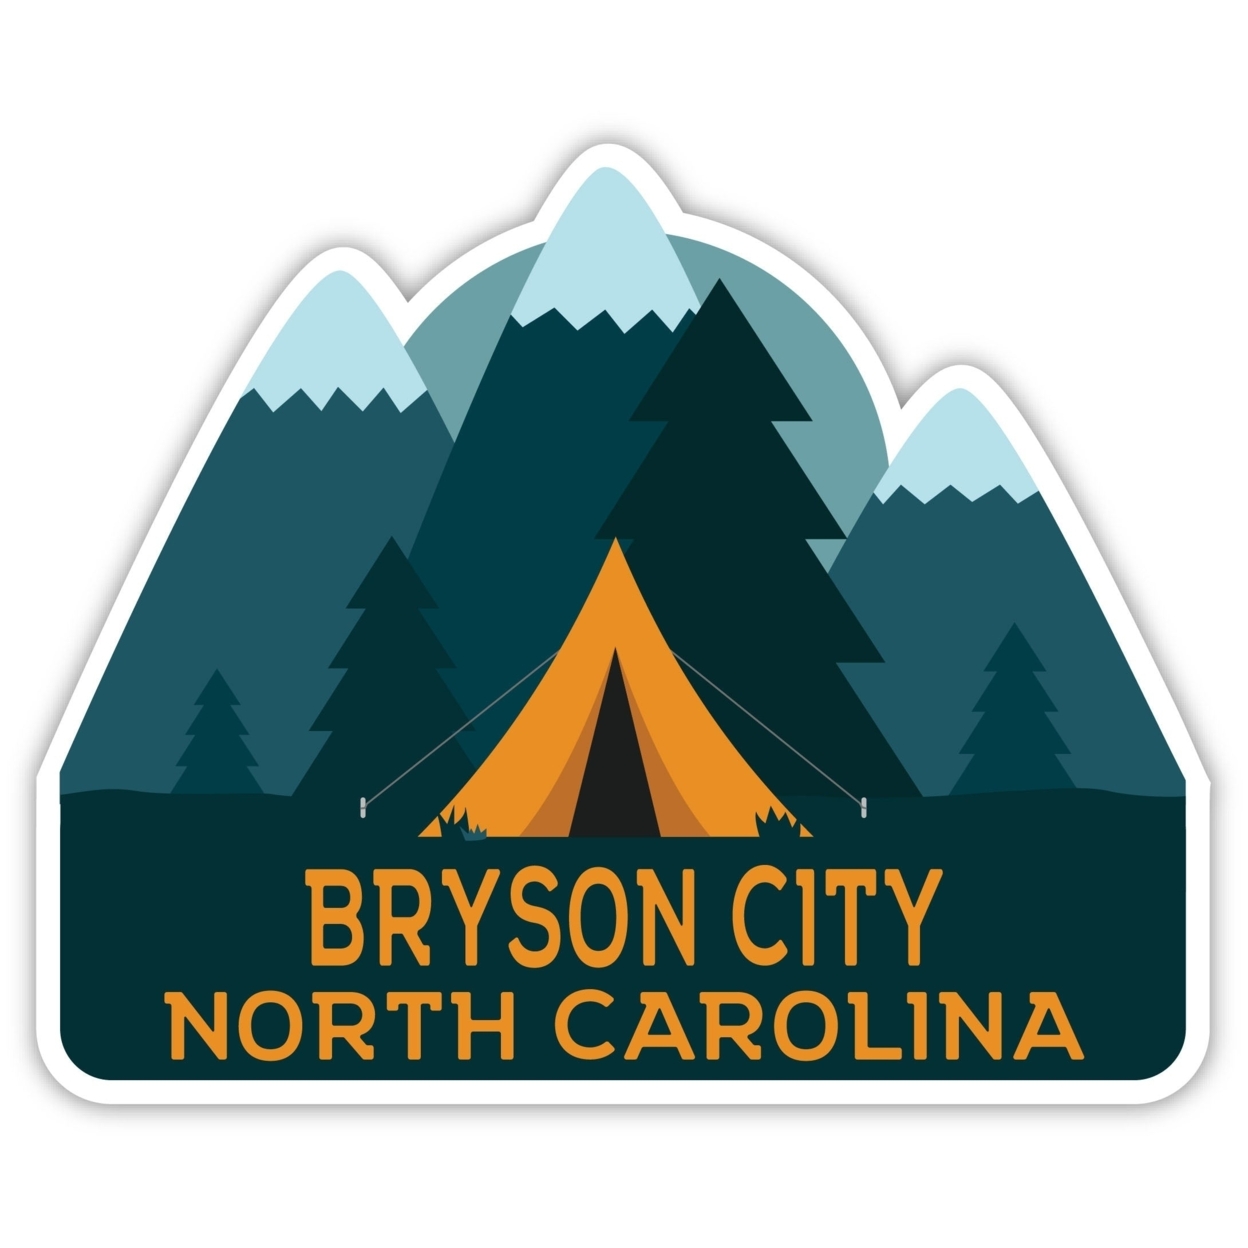 Bryson City North Carolina Souvenir Decorative Stickers (Choose Theme And Size) - 4-Pack, 10-Inch, Adventures Awaits